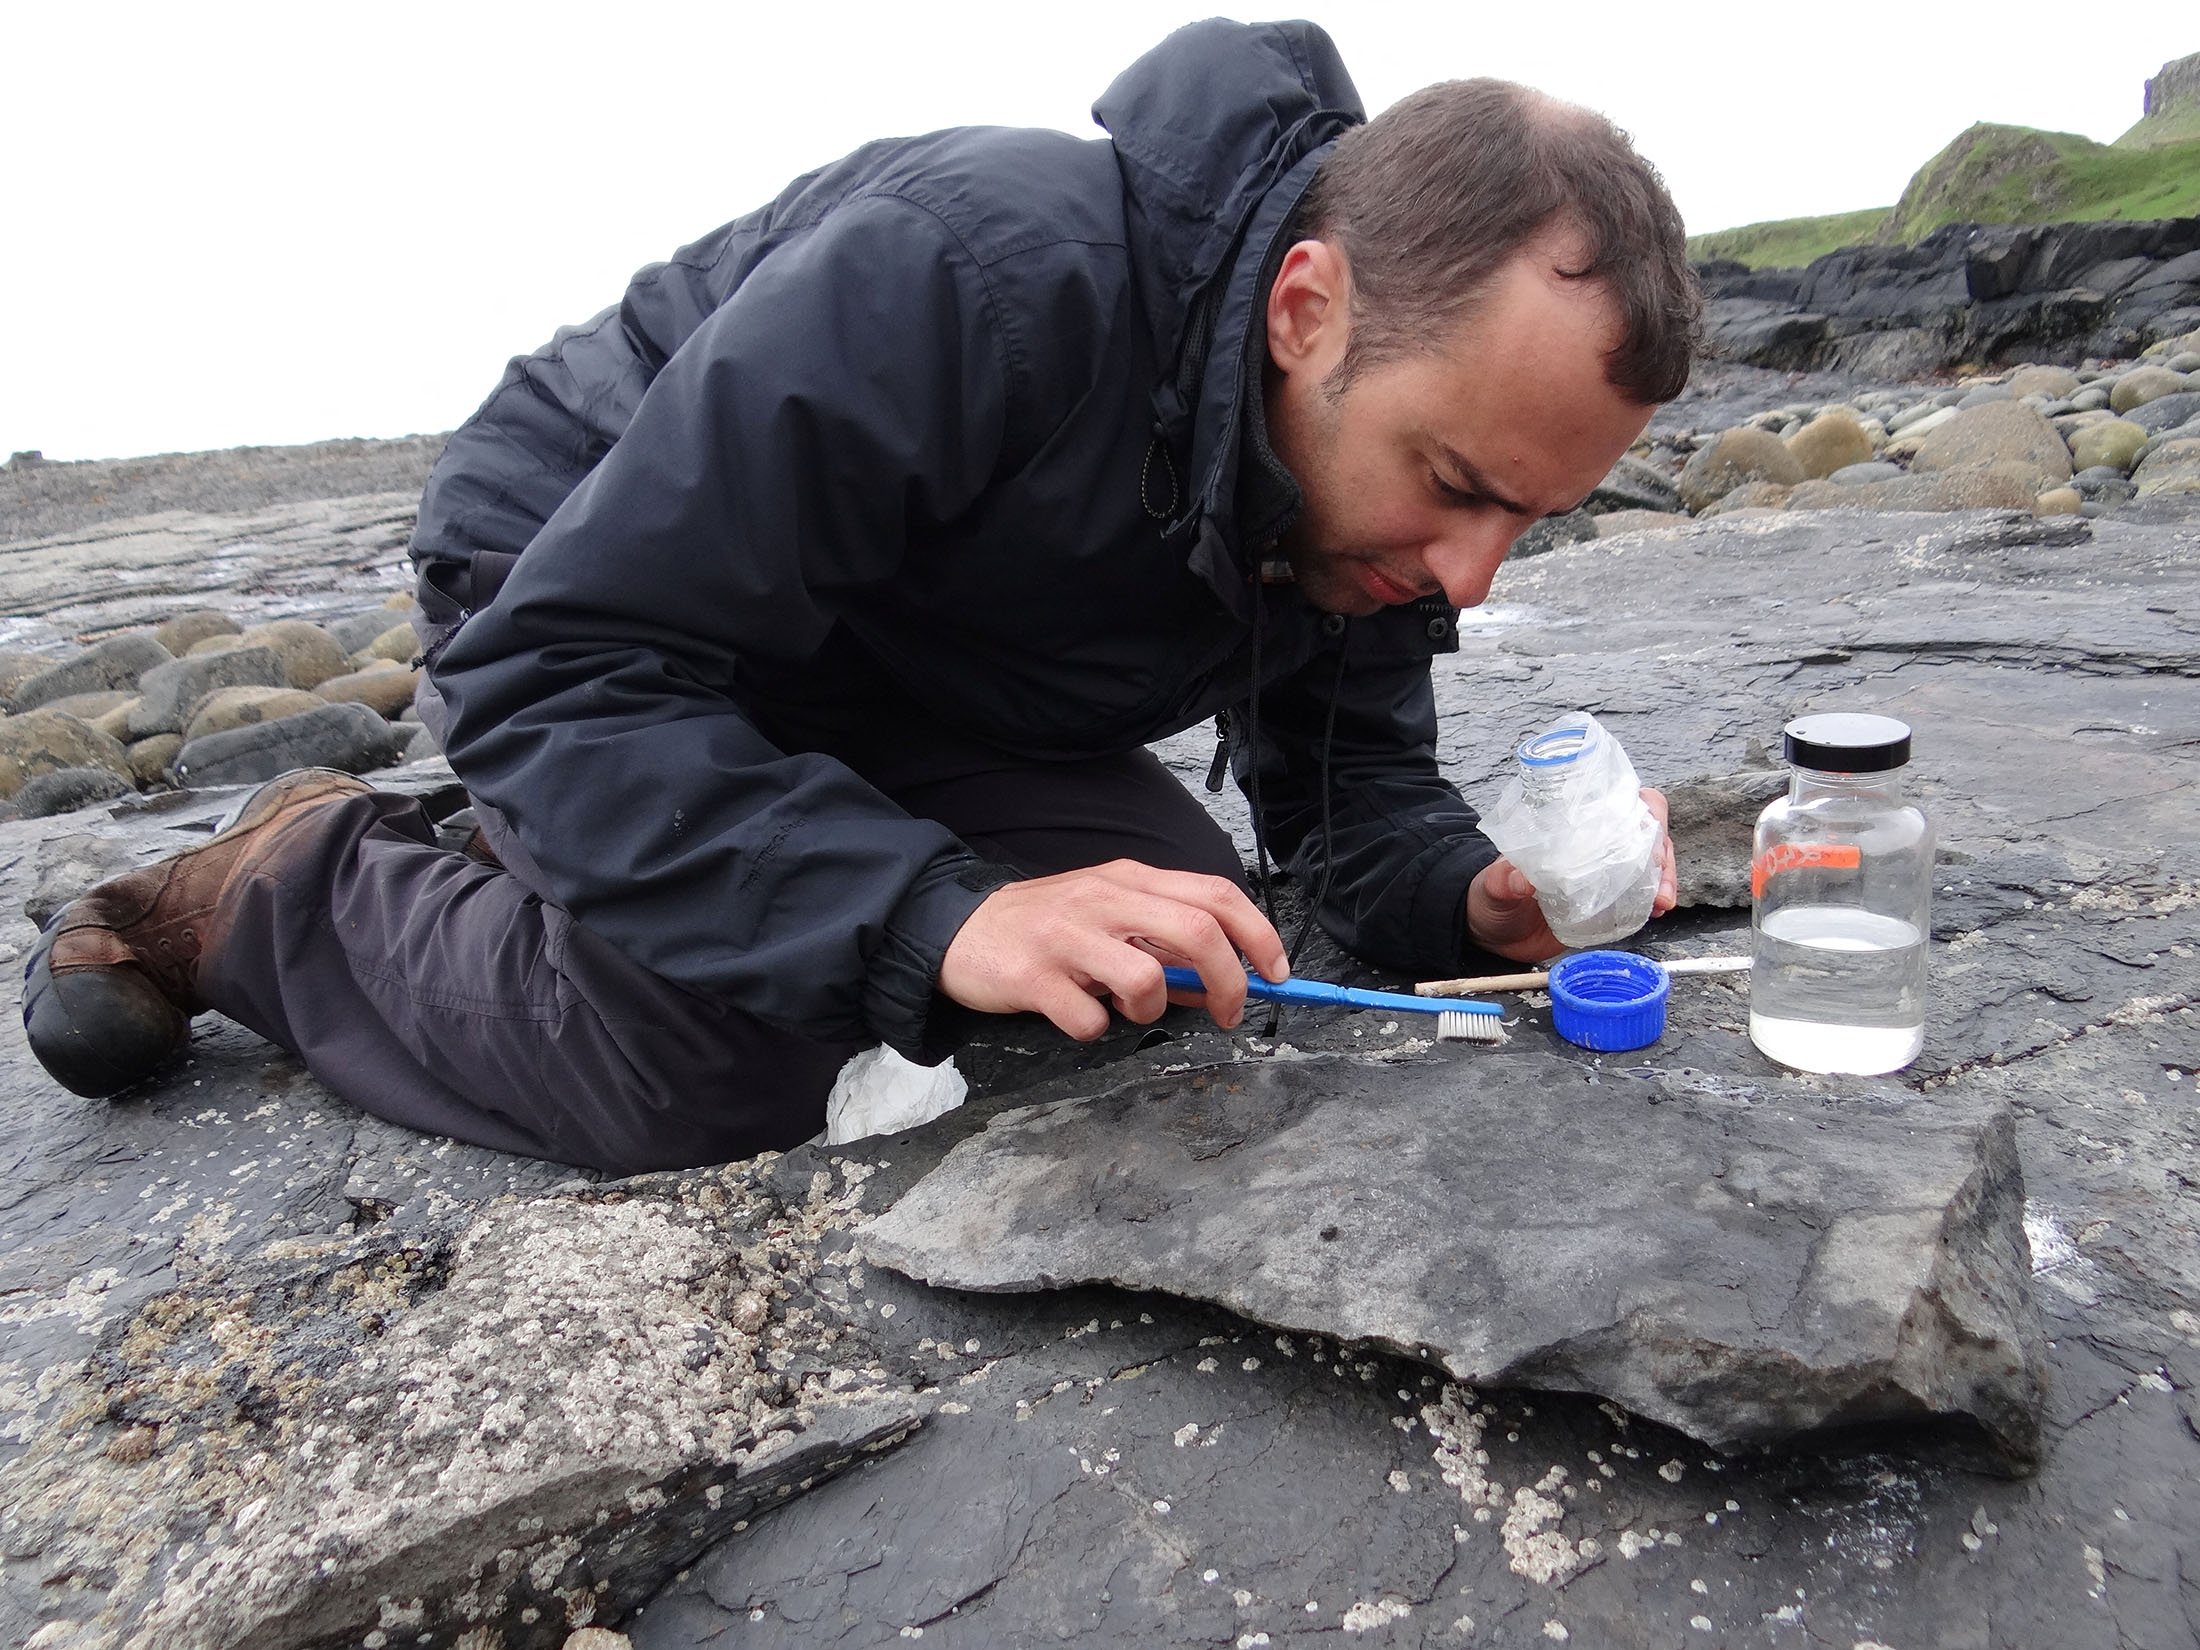 University of Edinburgh paleontologist Steve Brusatte works to conserve part of the fossil of a newly identified Jurassic Period flying reptile, or pterosaur, called "Dearc sgiathanach," found on a rocky beach at Scotland's Isle of Skye, U.K., May, 2017. (Shasta Marrero via Reuters)